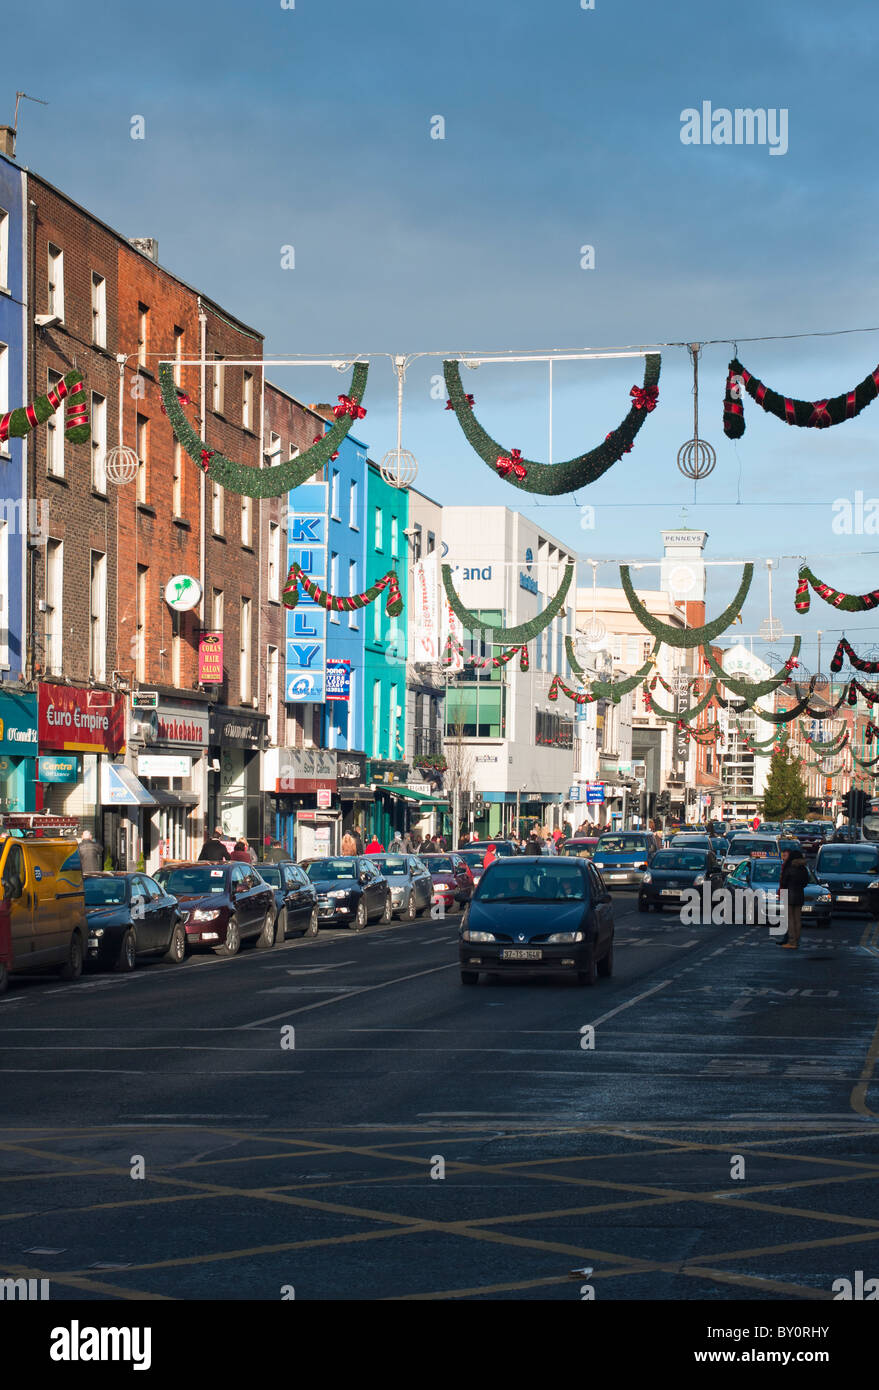 Limerick's O'Connell street. Republic of Ireland Stock Photo